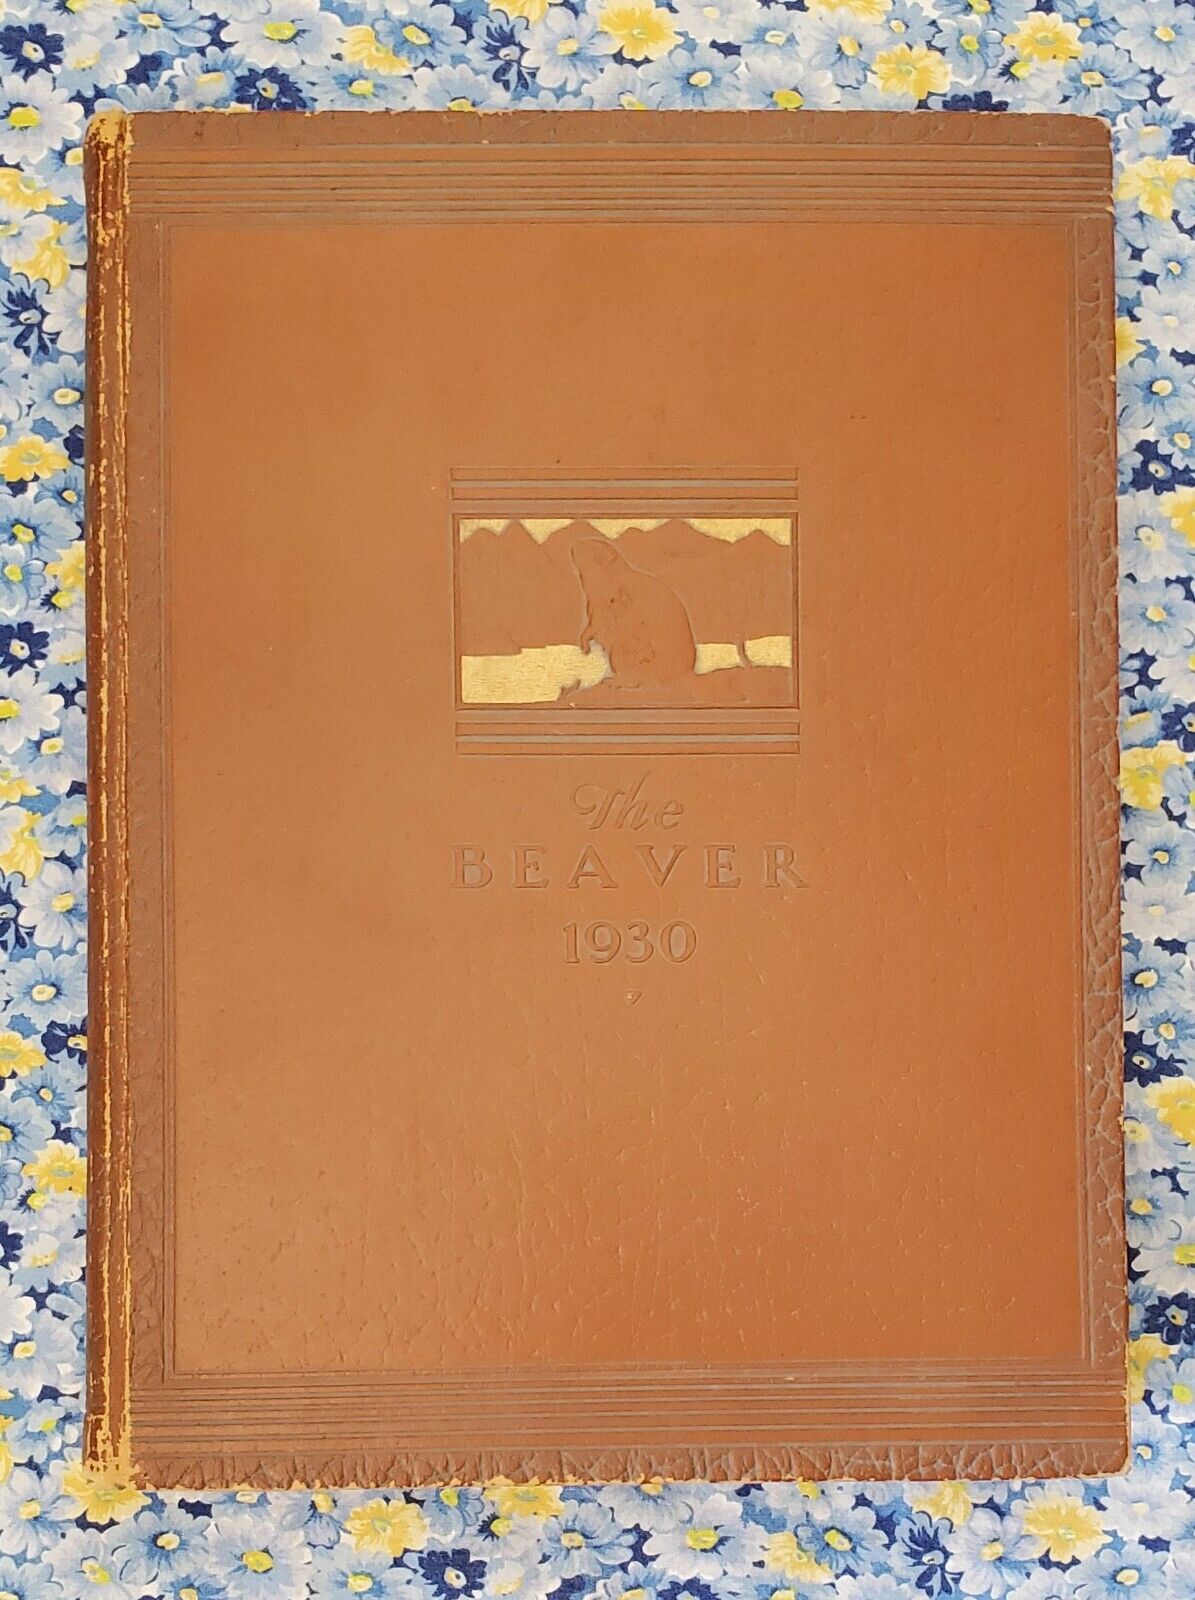 The Beaver, Oregon State Collage Yearbook, 1930 